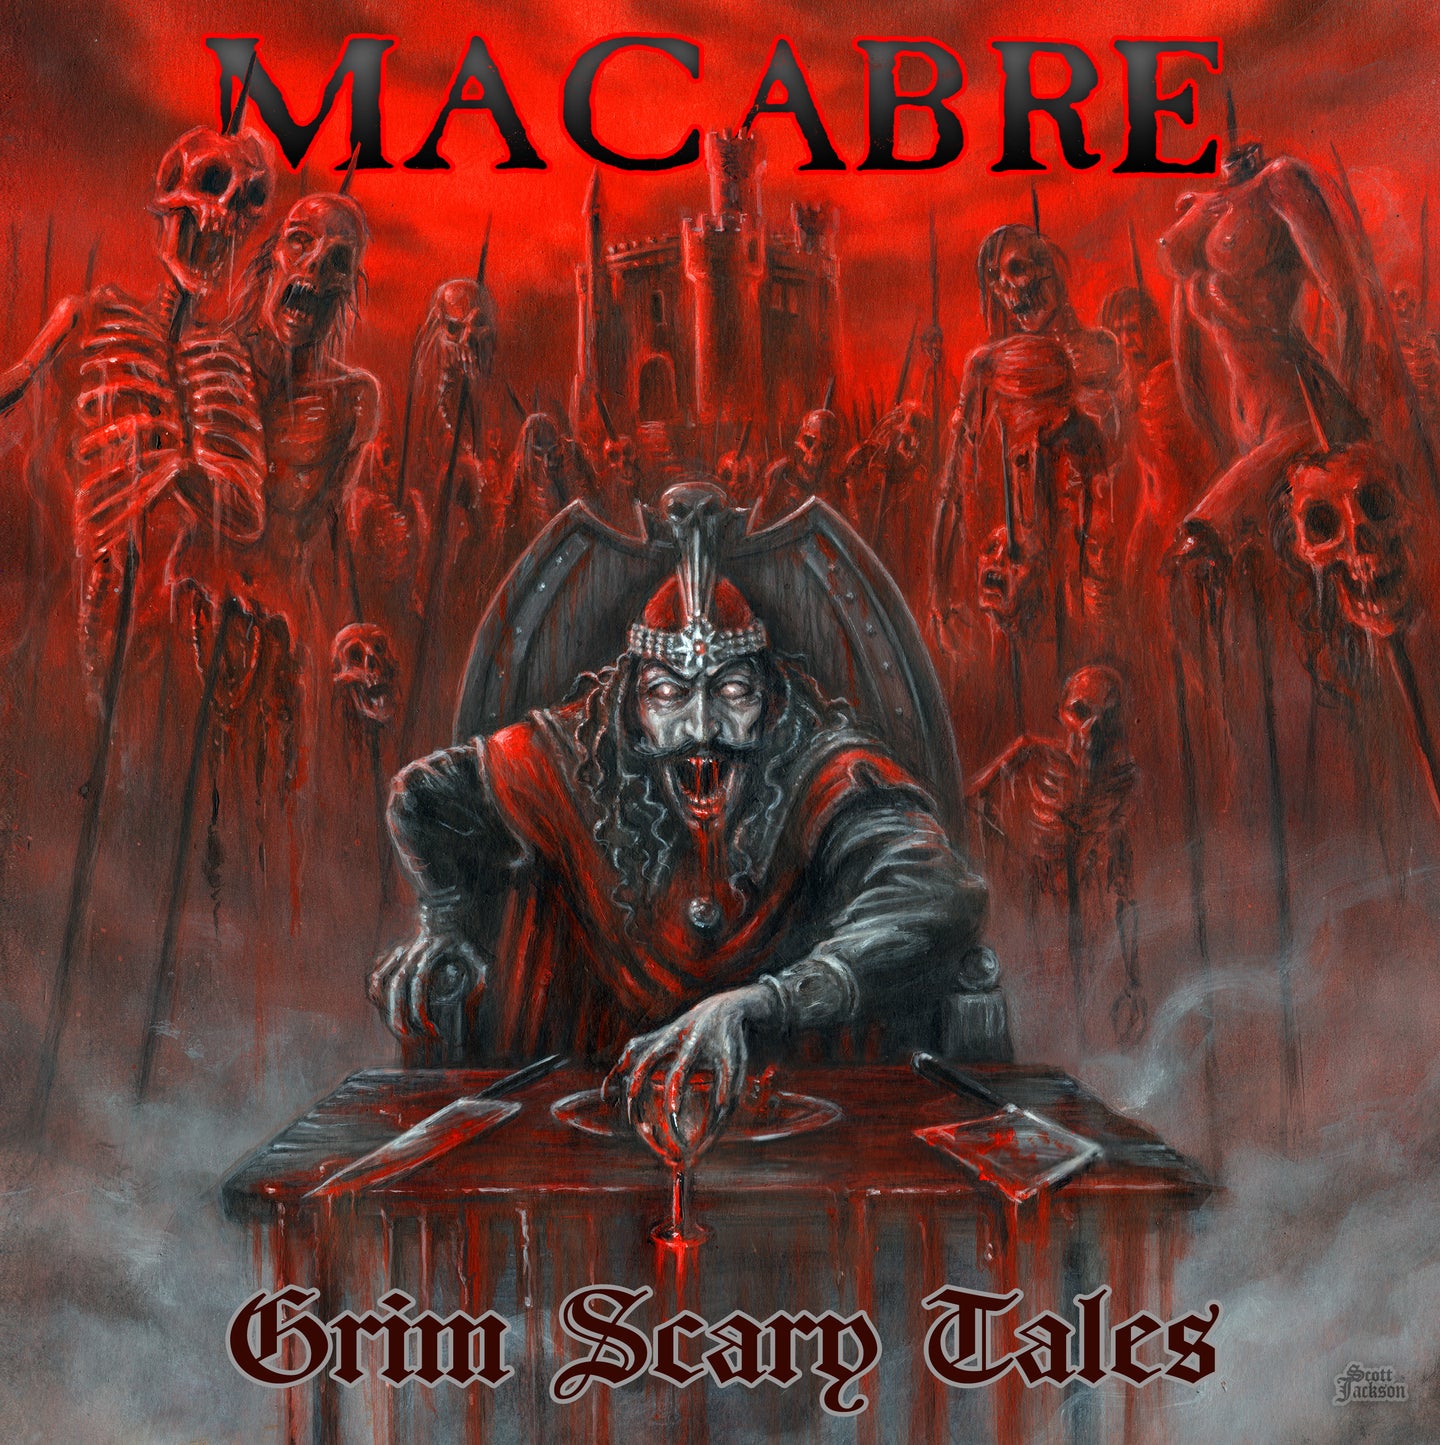 Grim Scary Tales